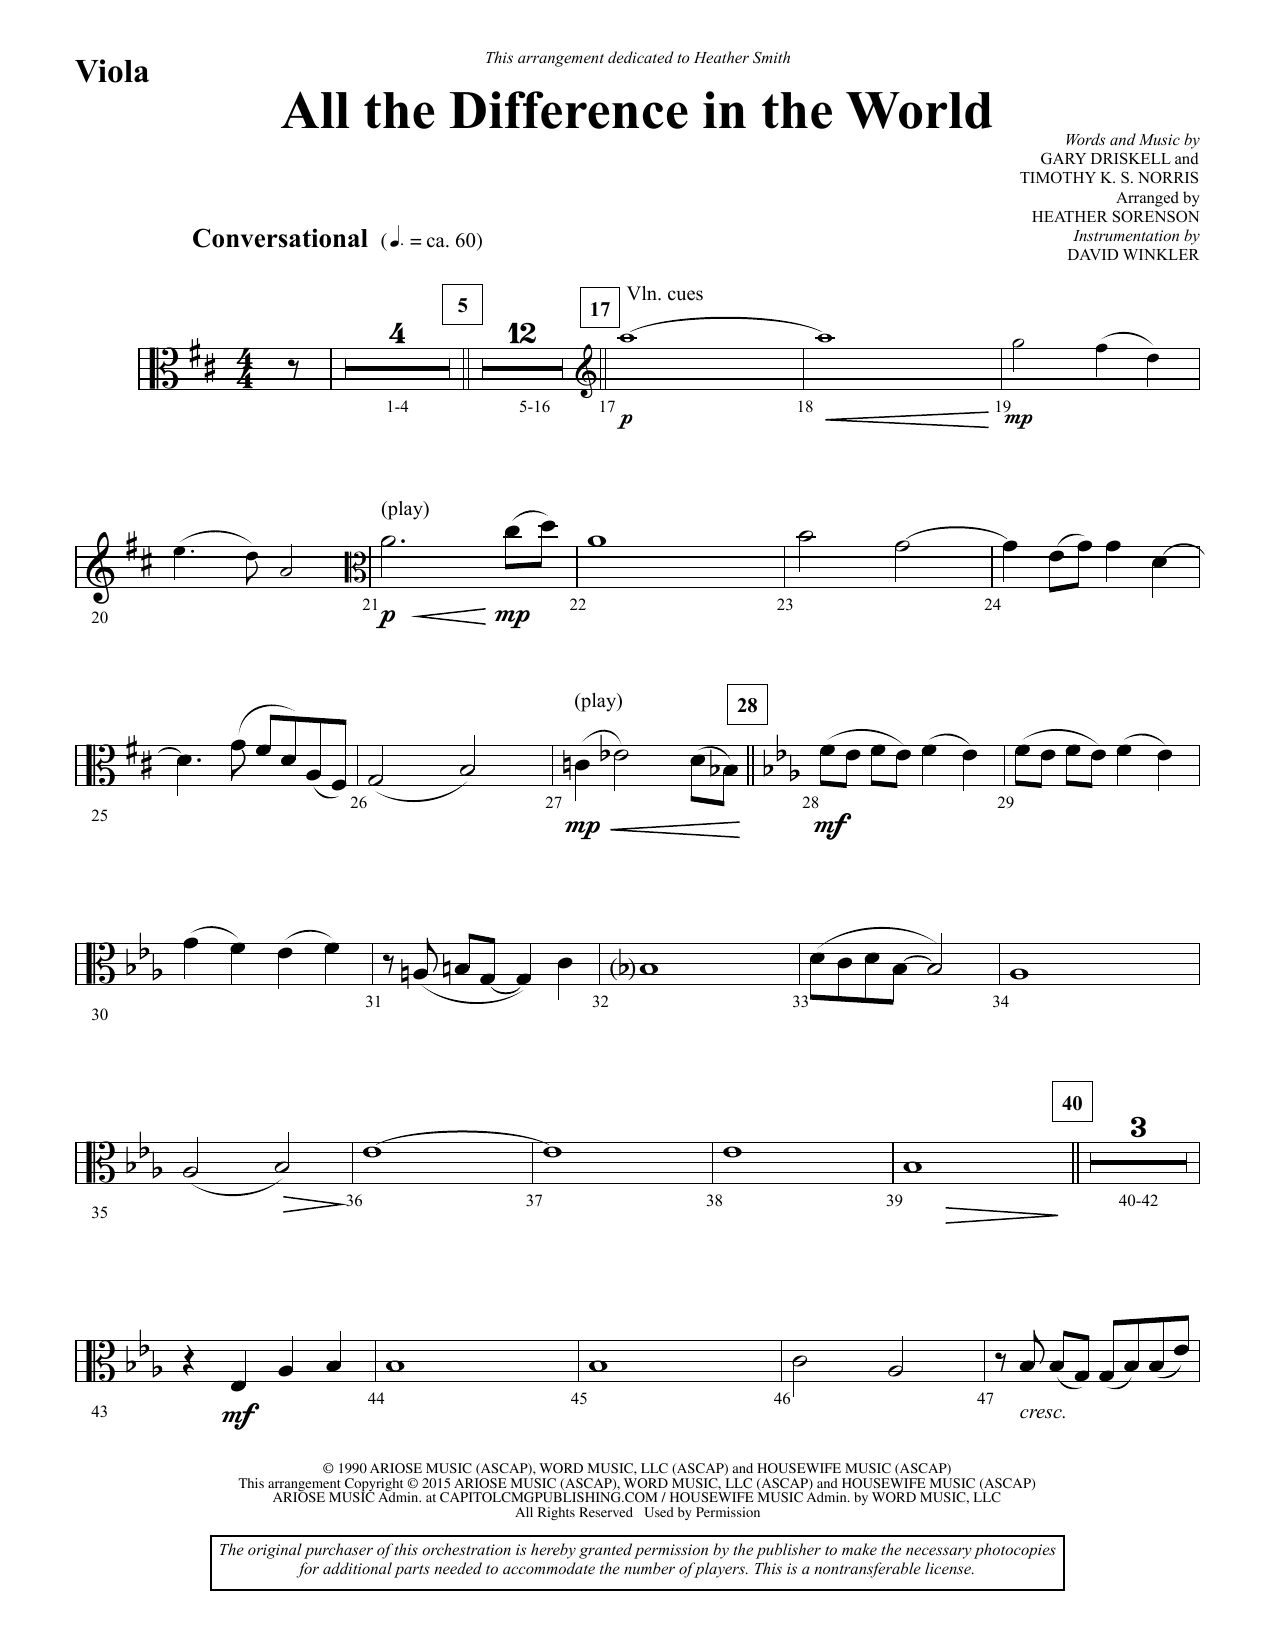 Heather Sorenson All the Difference in the World - Viola sheet music notes and chords. Download Printable PDF.